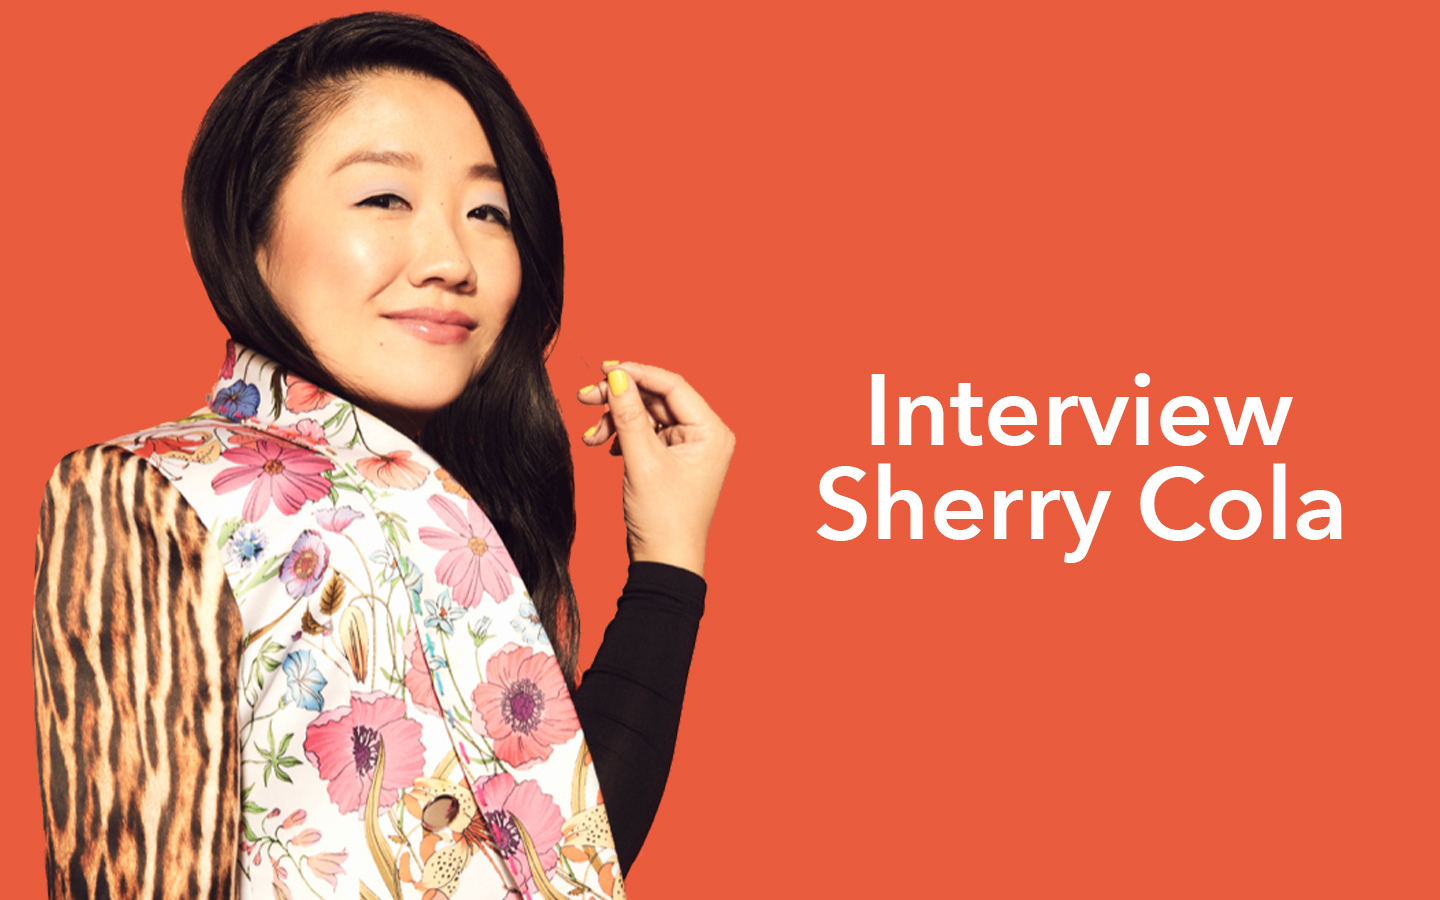 Sherry Cola Talks ‘Shortcomings’, Asian Representation in Media & More – Sundance 2023 Interview